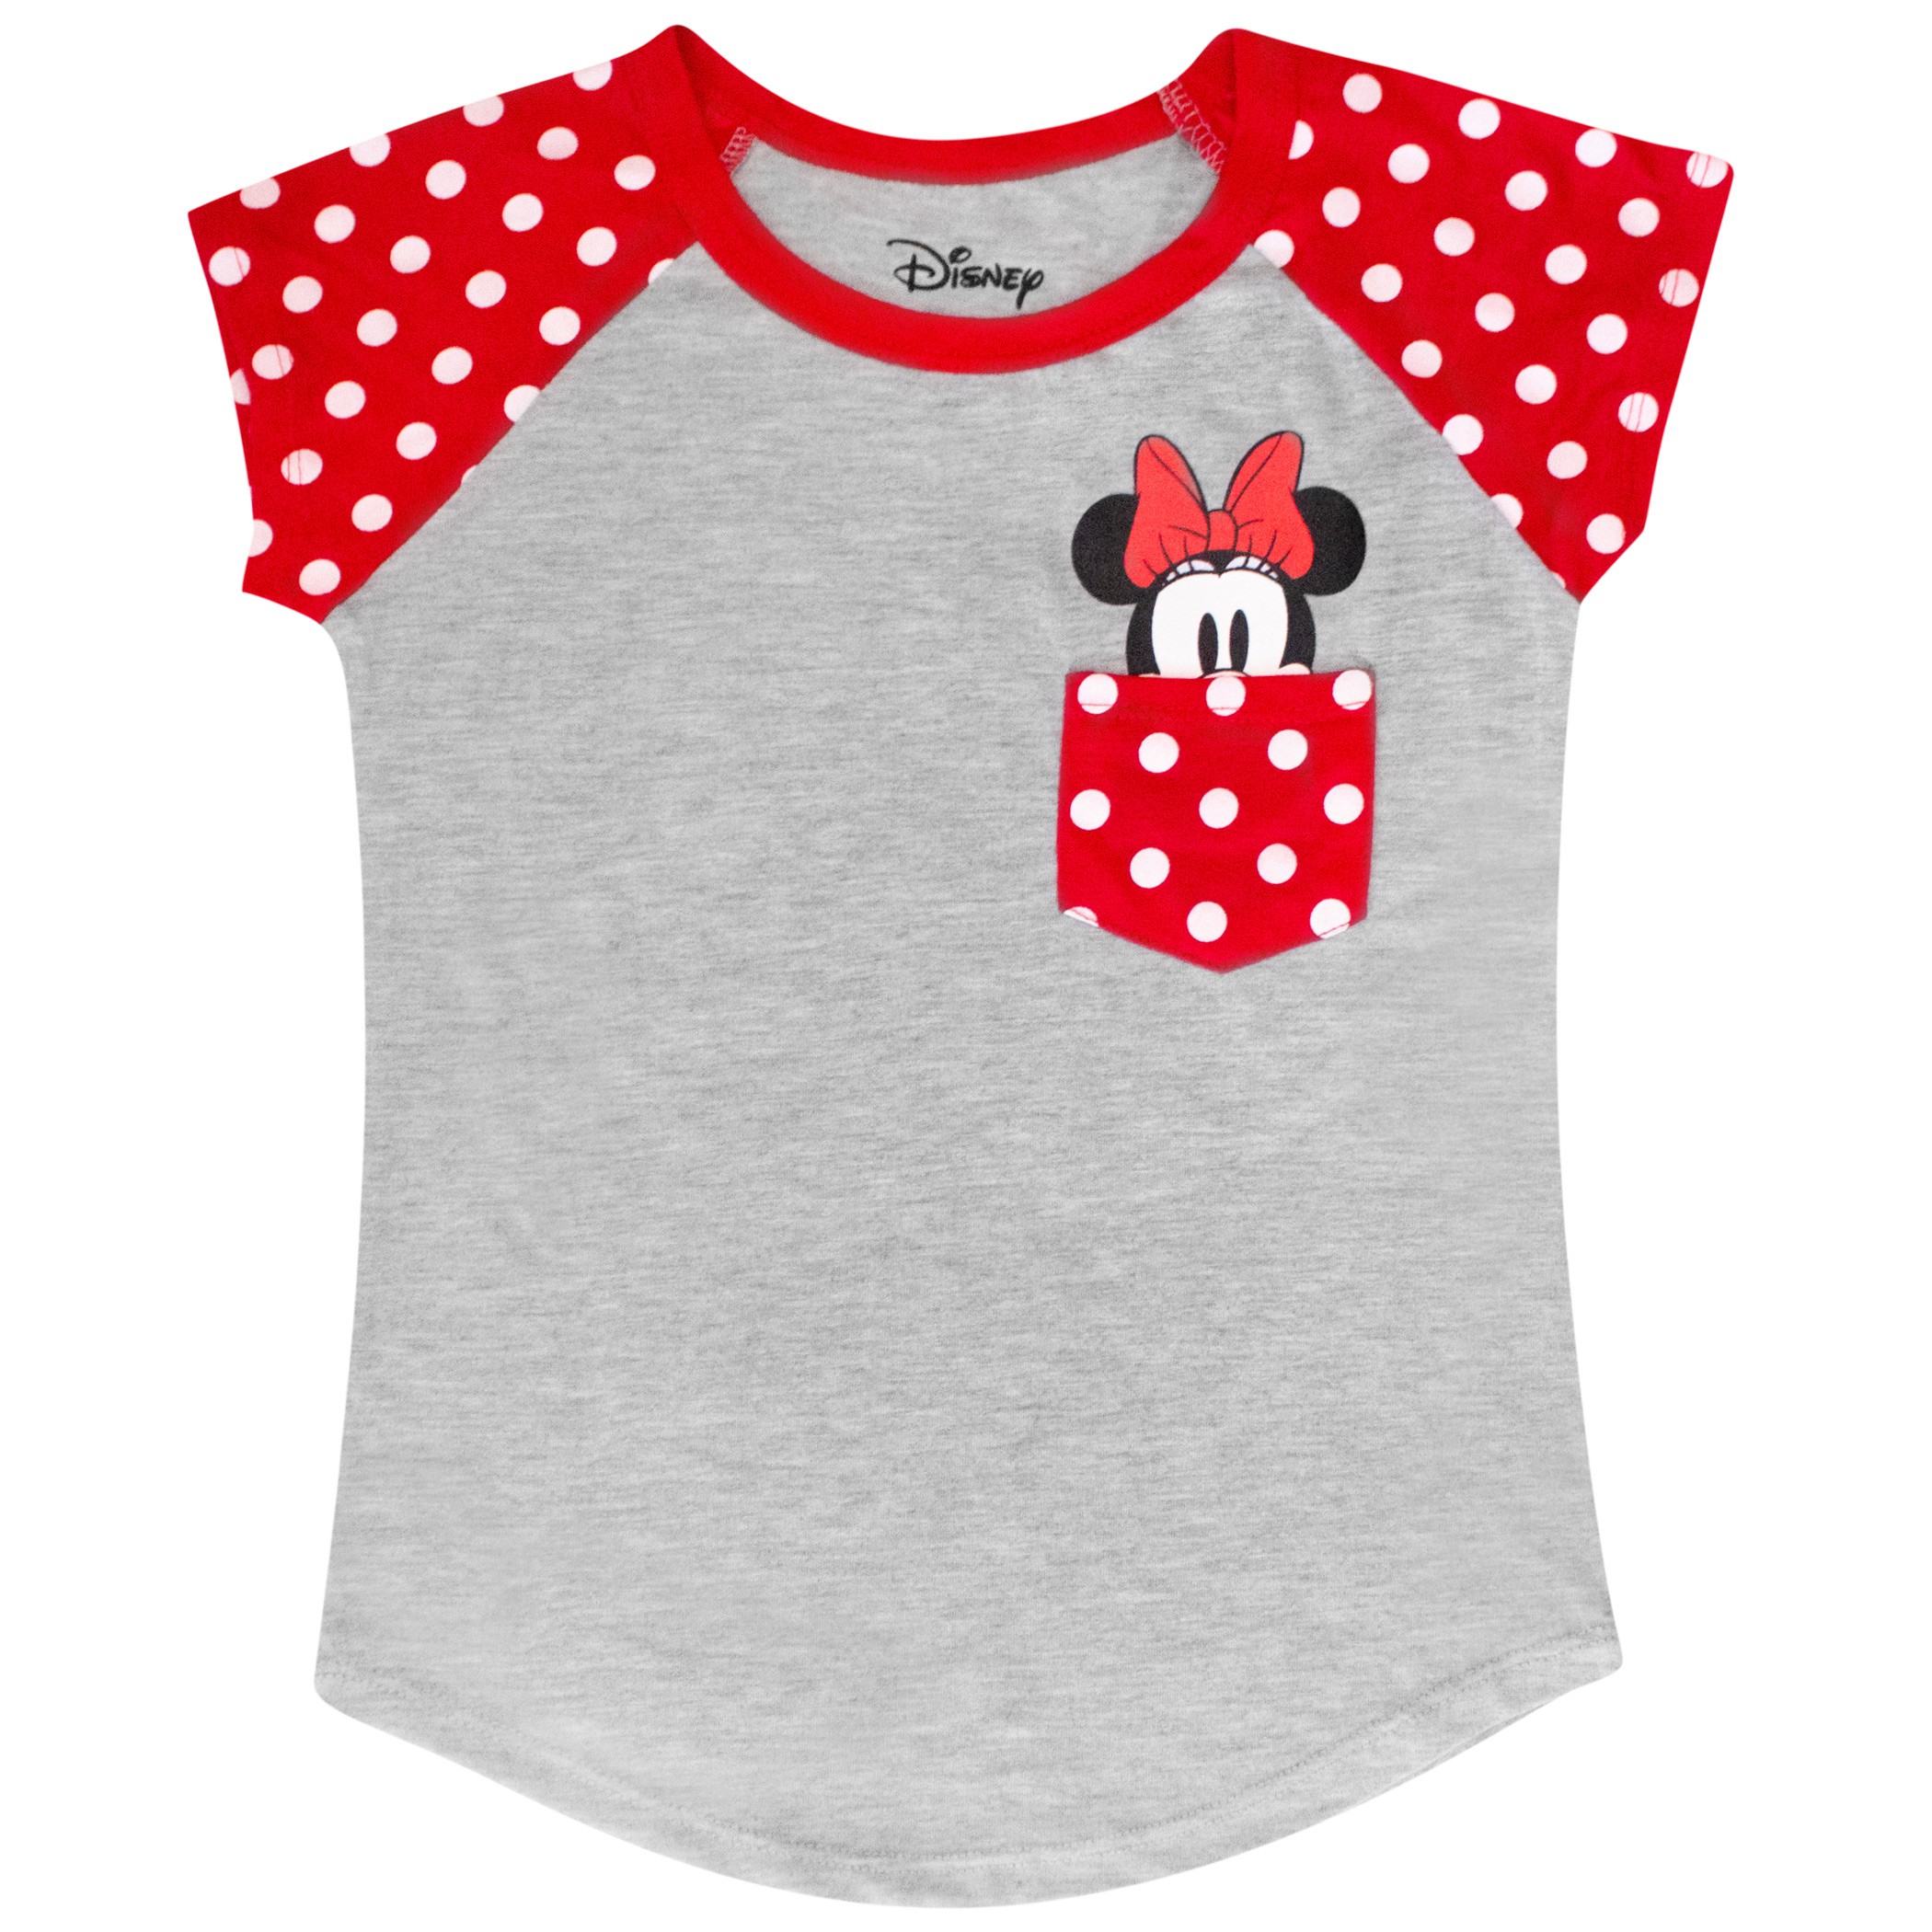 Minnie Mouse Youth Sized Pocket Tee